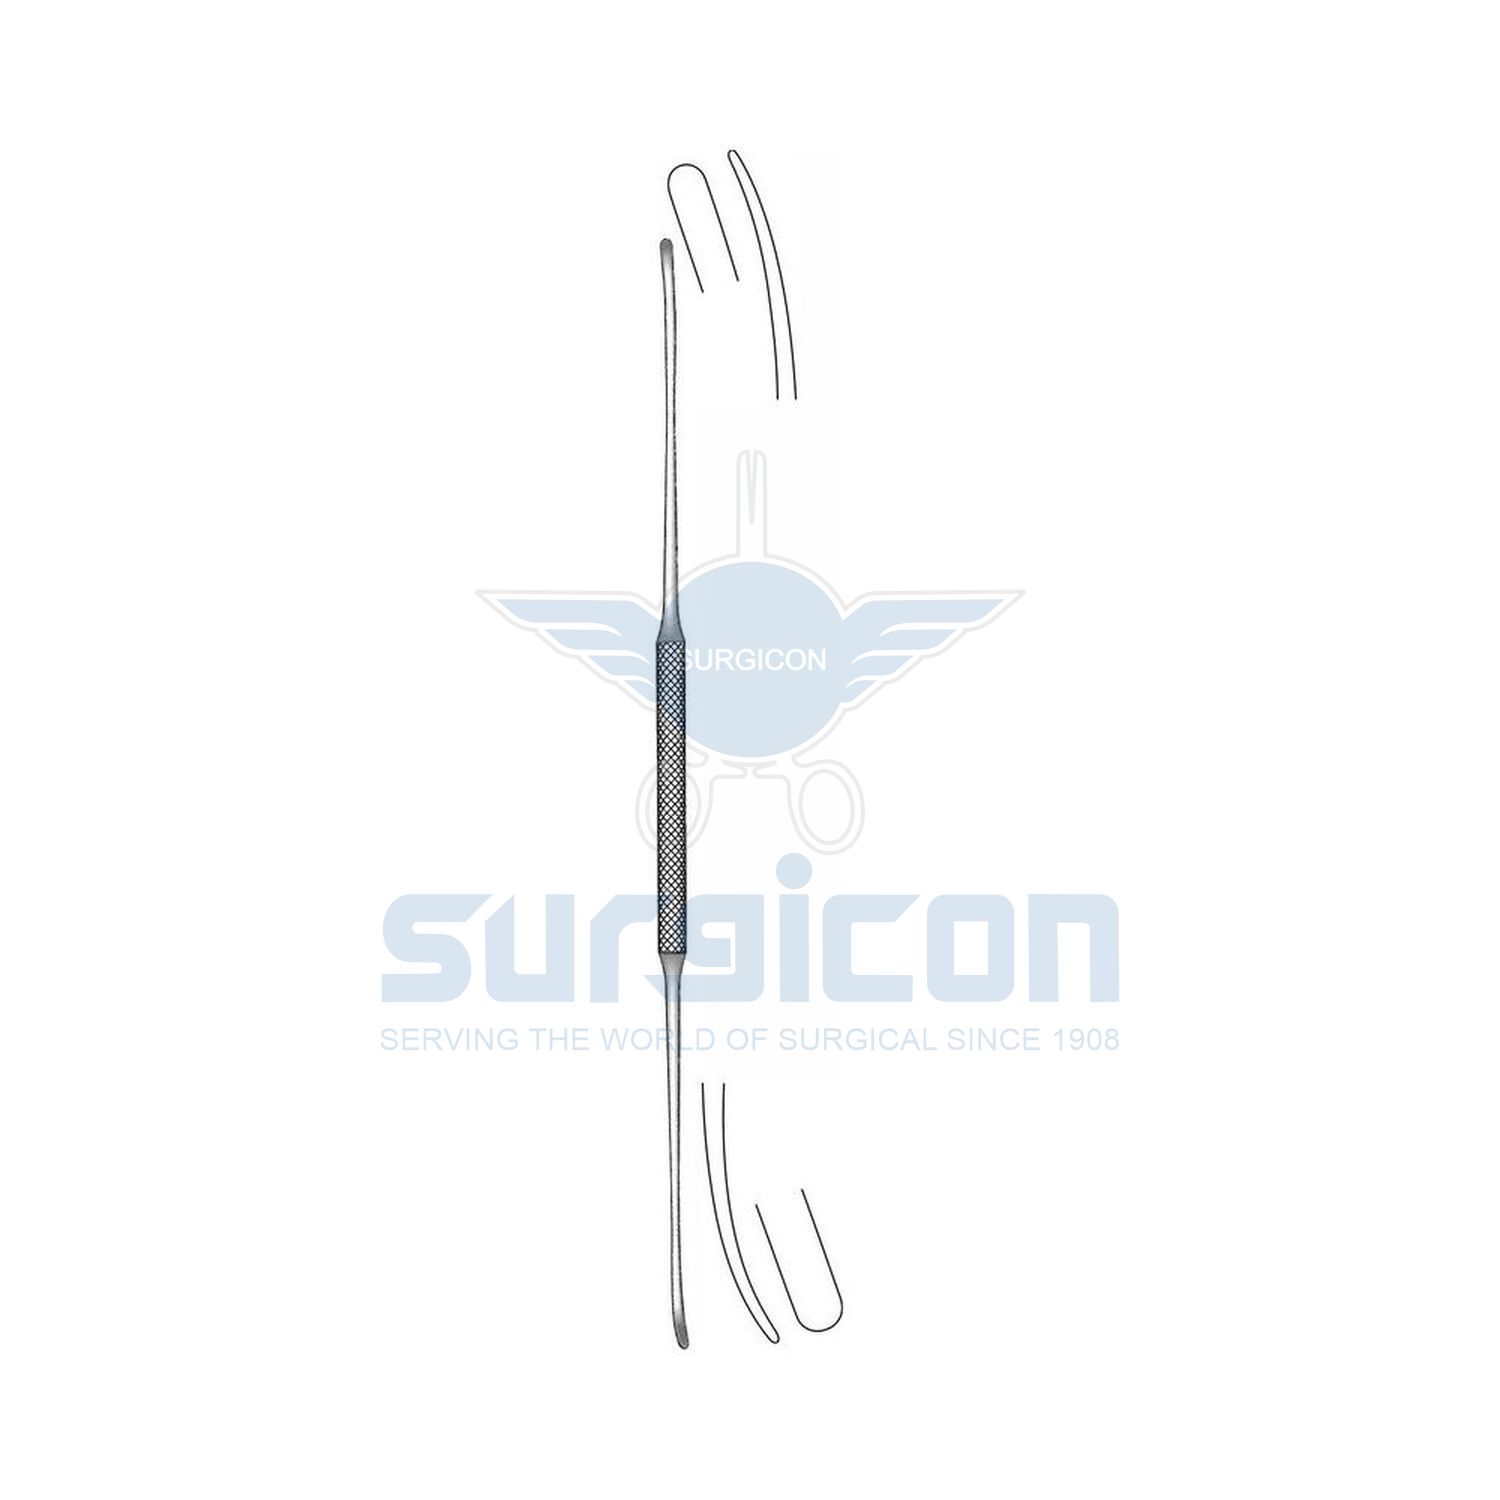 Olivecrona-Dissector-J-25-393